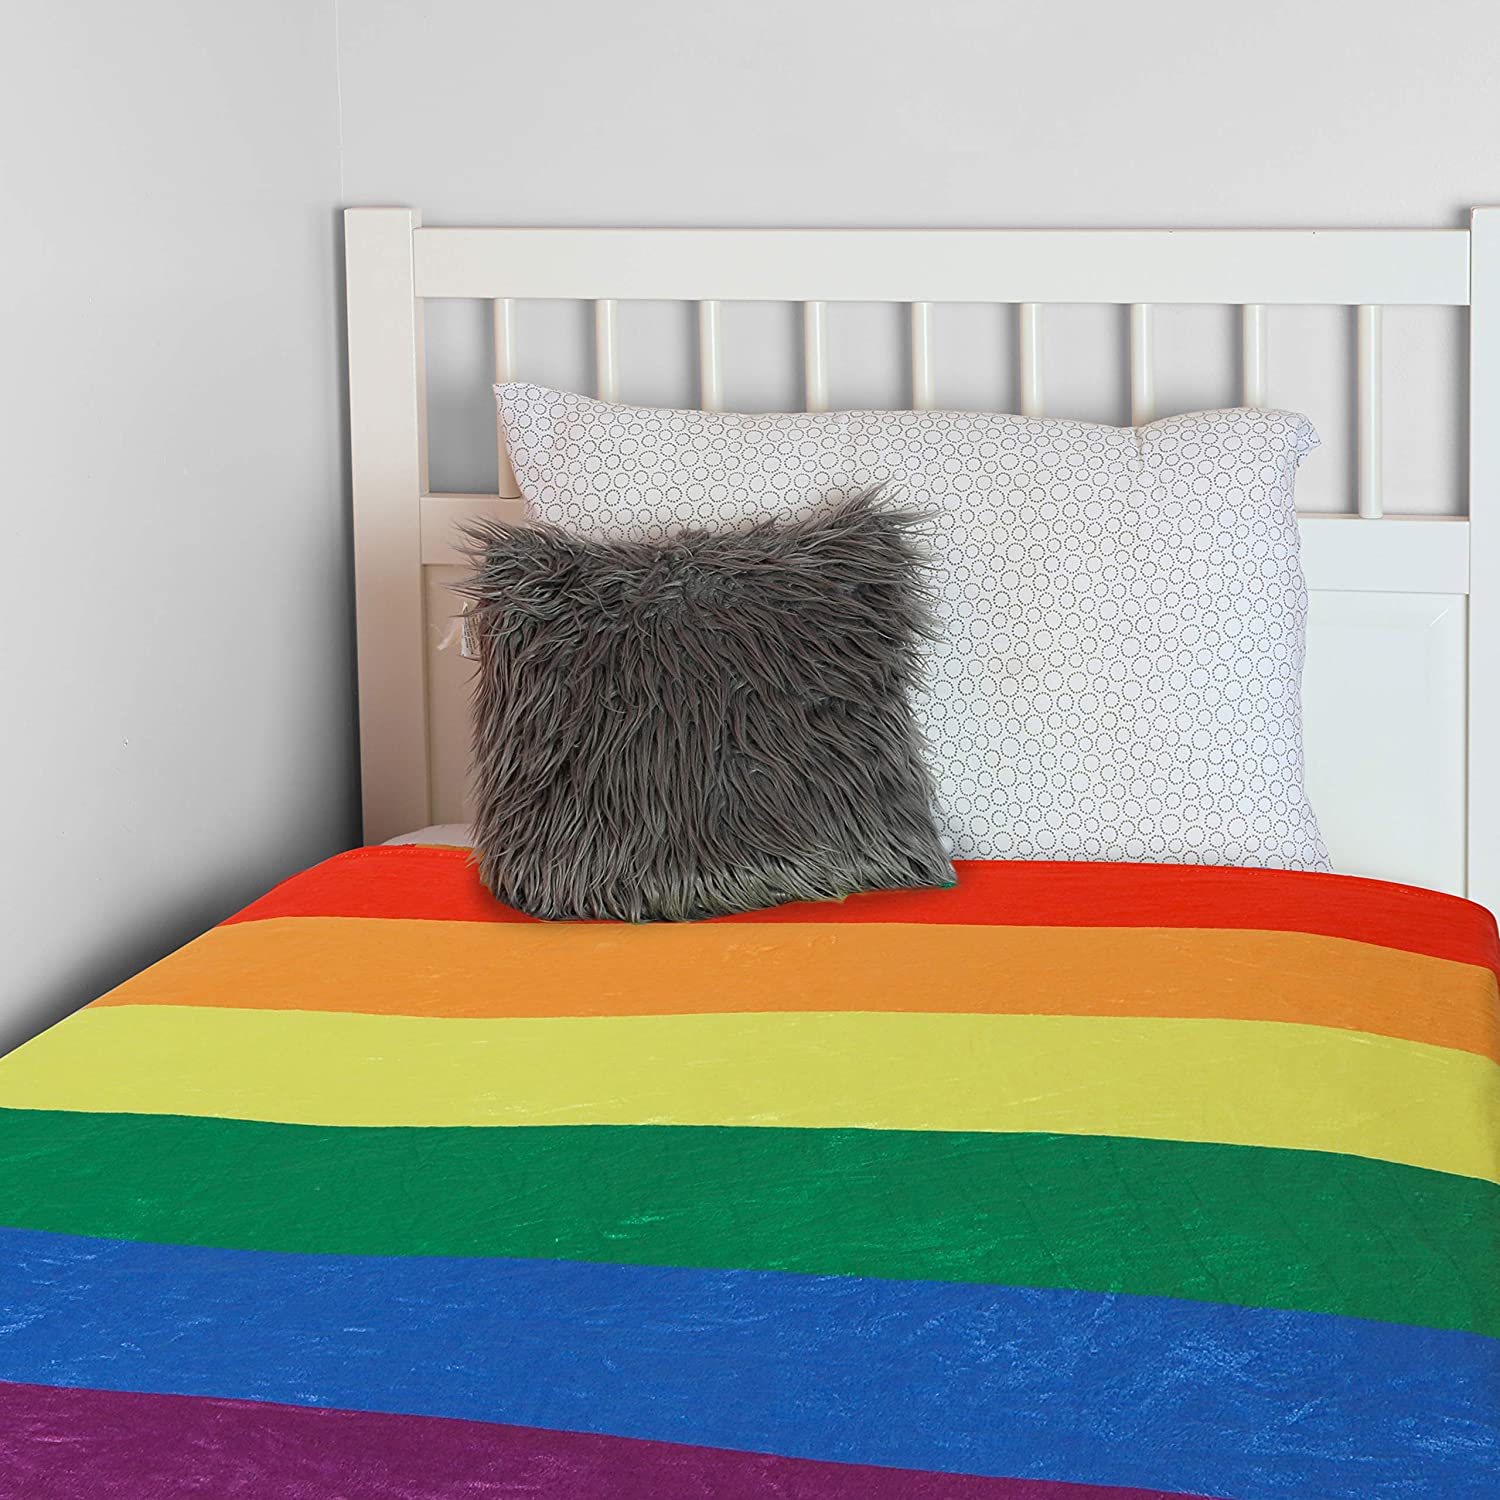 Pride Throw Blanket/ Lgbt Rainbow Pride Blanket Warm And Cozy Throw For Bed/ Gay Pride Accessories